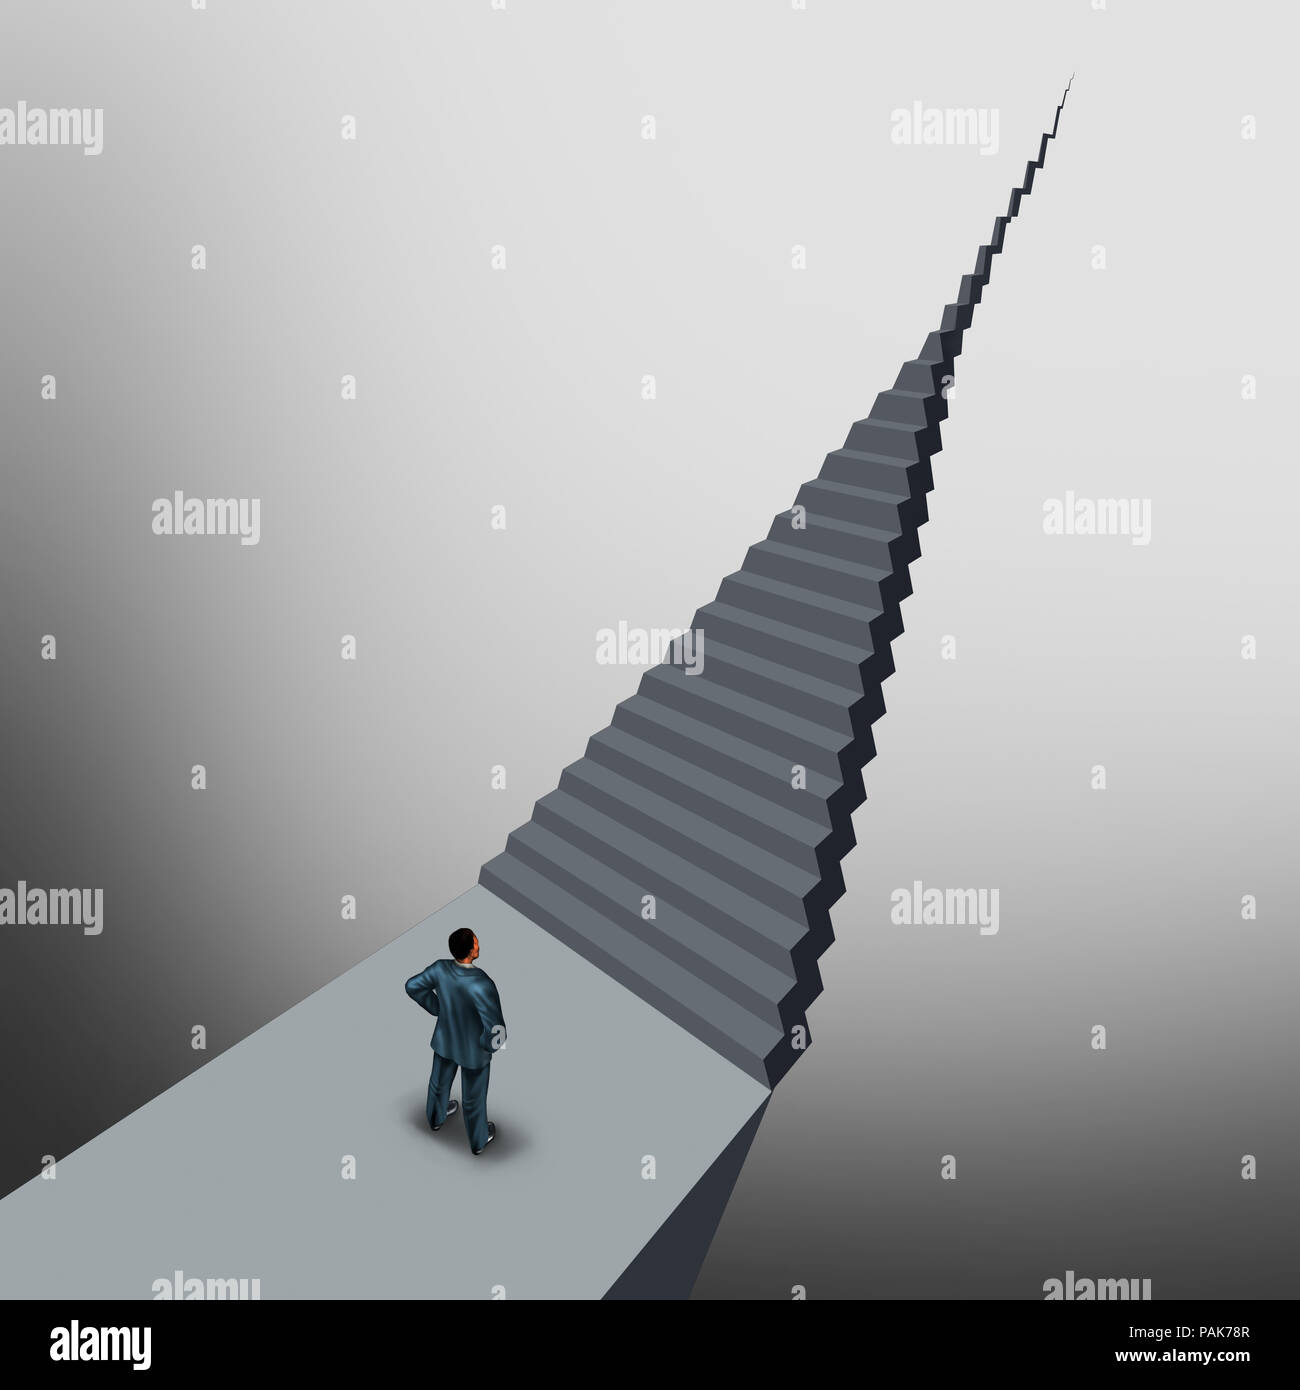 Decreasing career opportunity as a business concept and financial metaphor with 3D illustration elements. Stock Photo